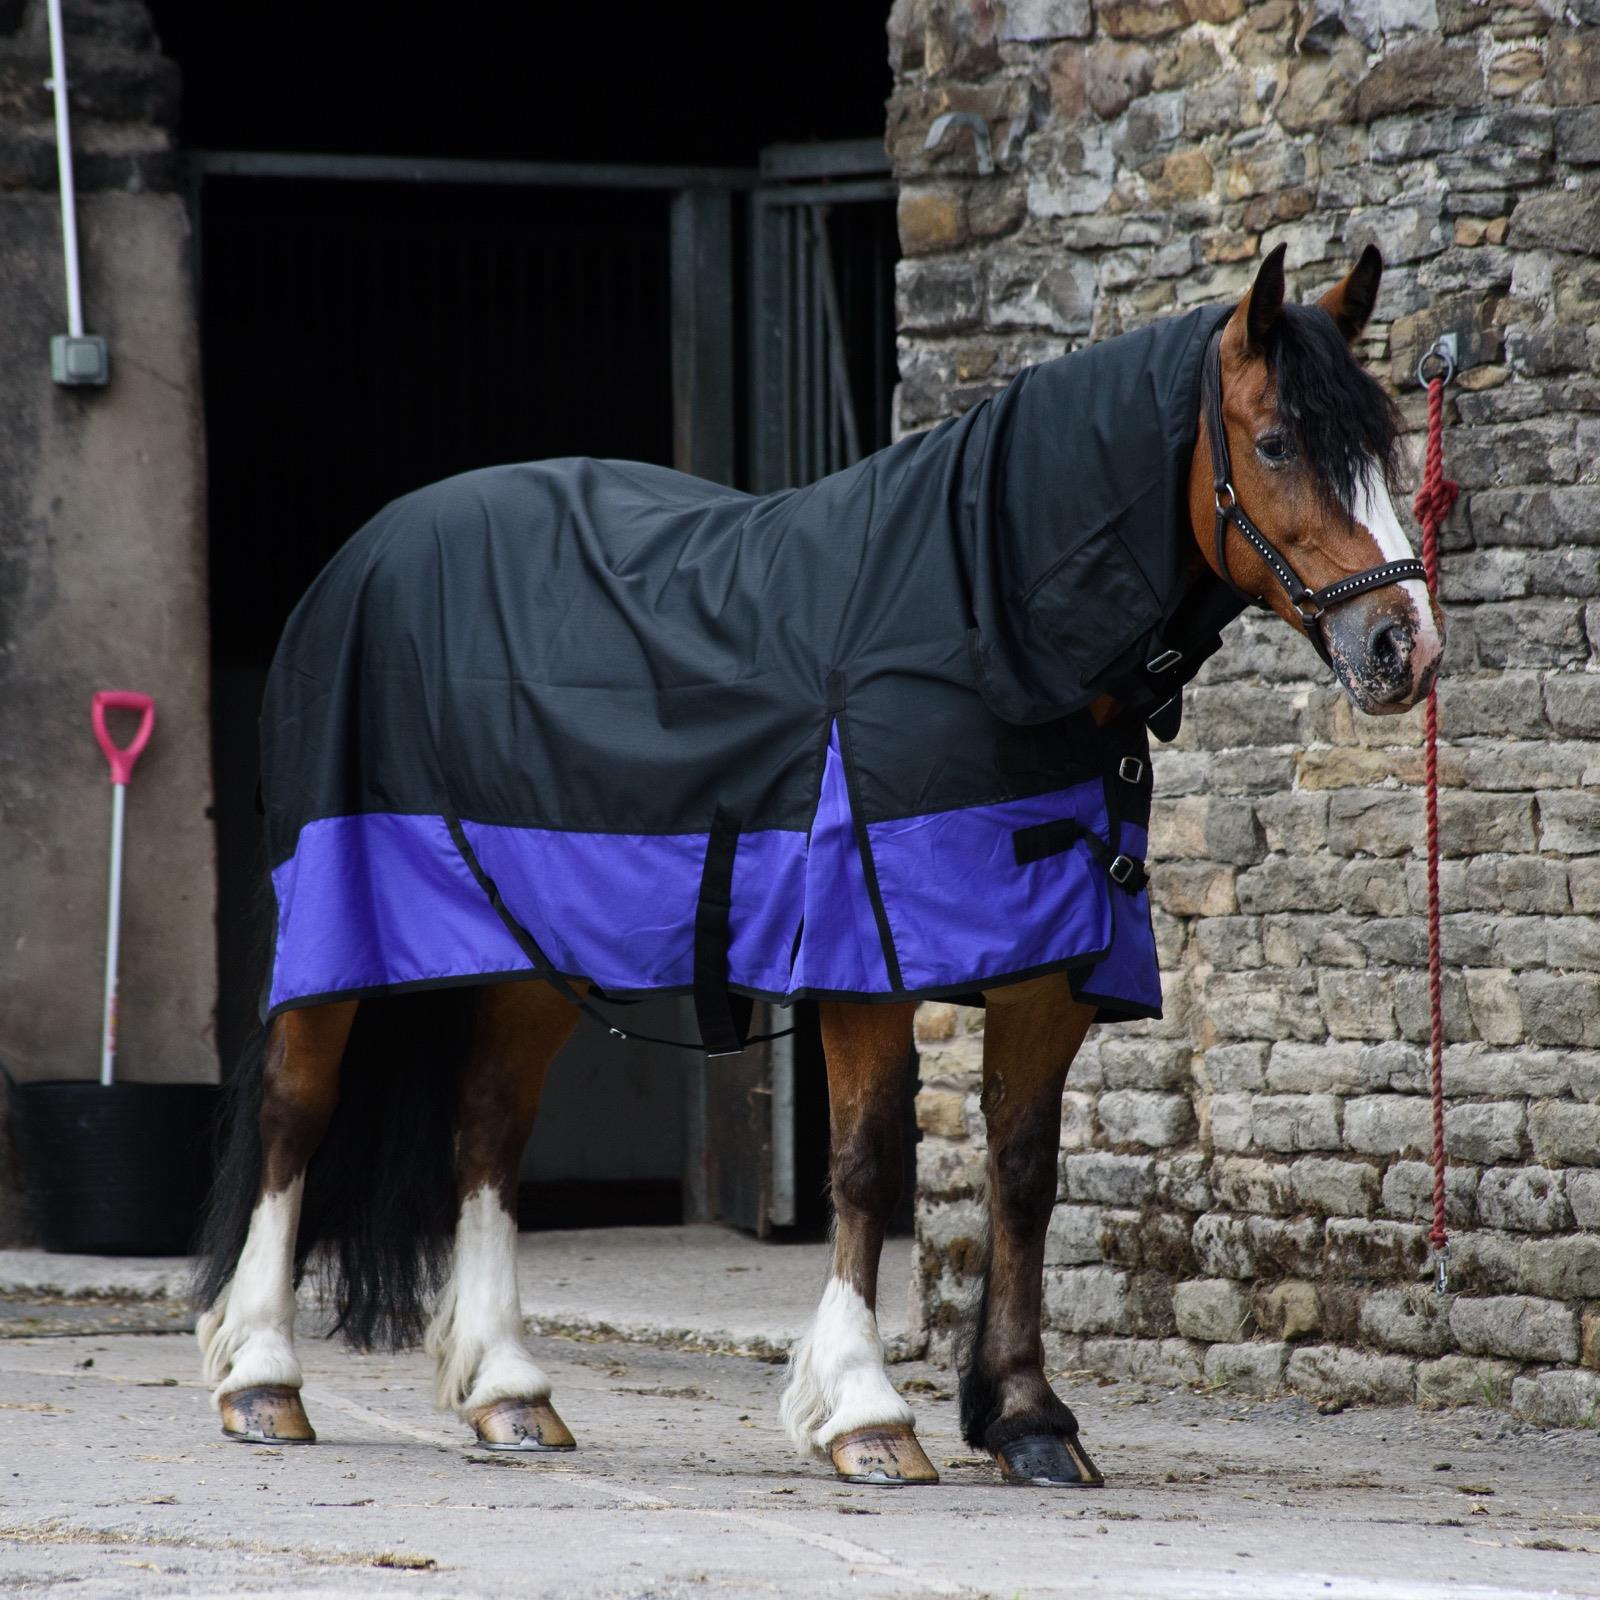 600D Outdoor Winter Turnout Horse Rugs 50G Fill COMBO Full Neck Black/Purple 5'3-6'9